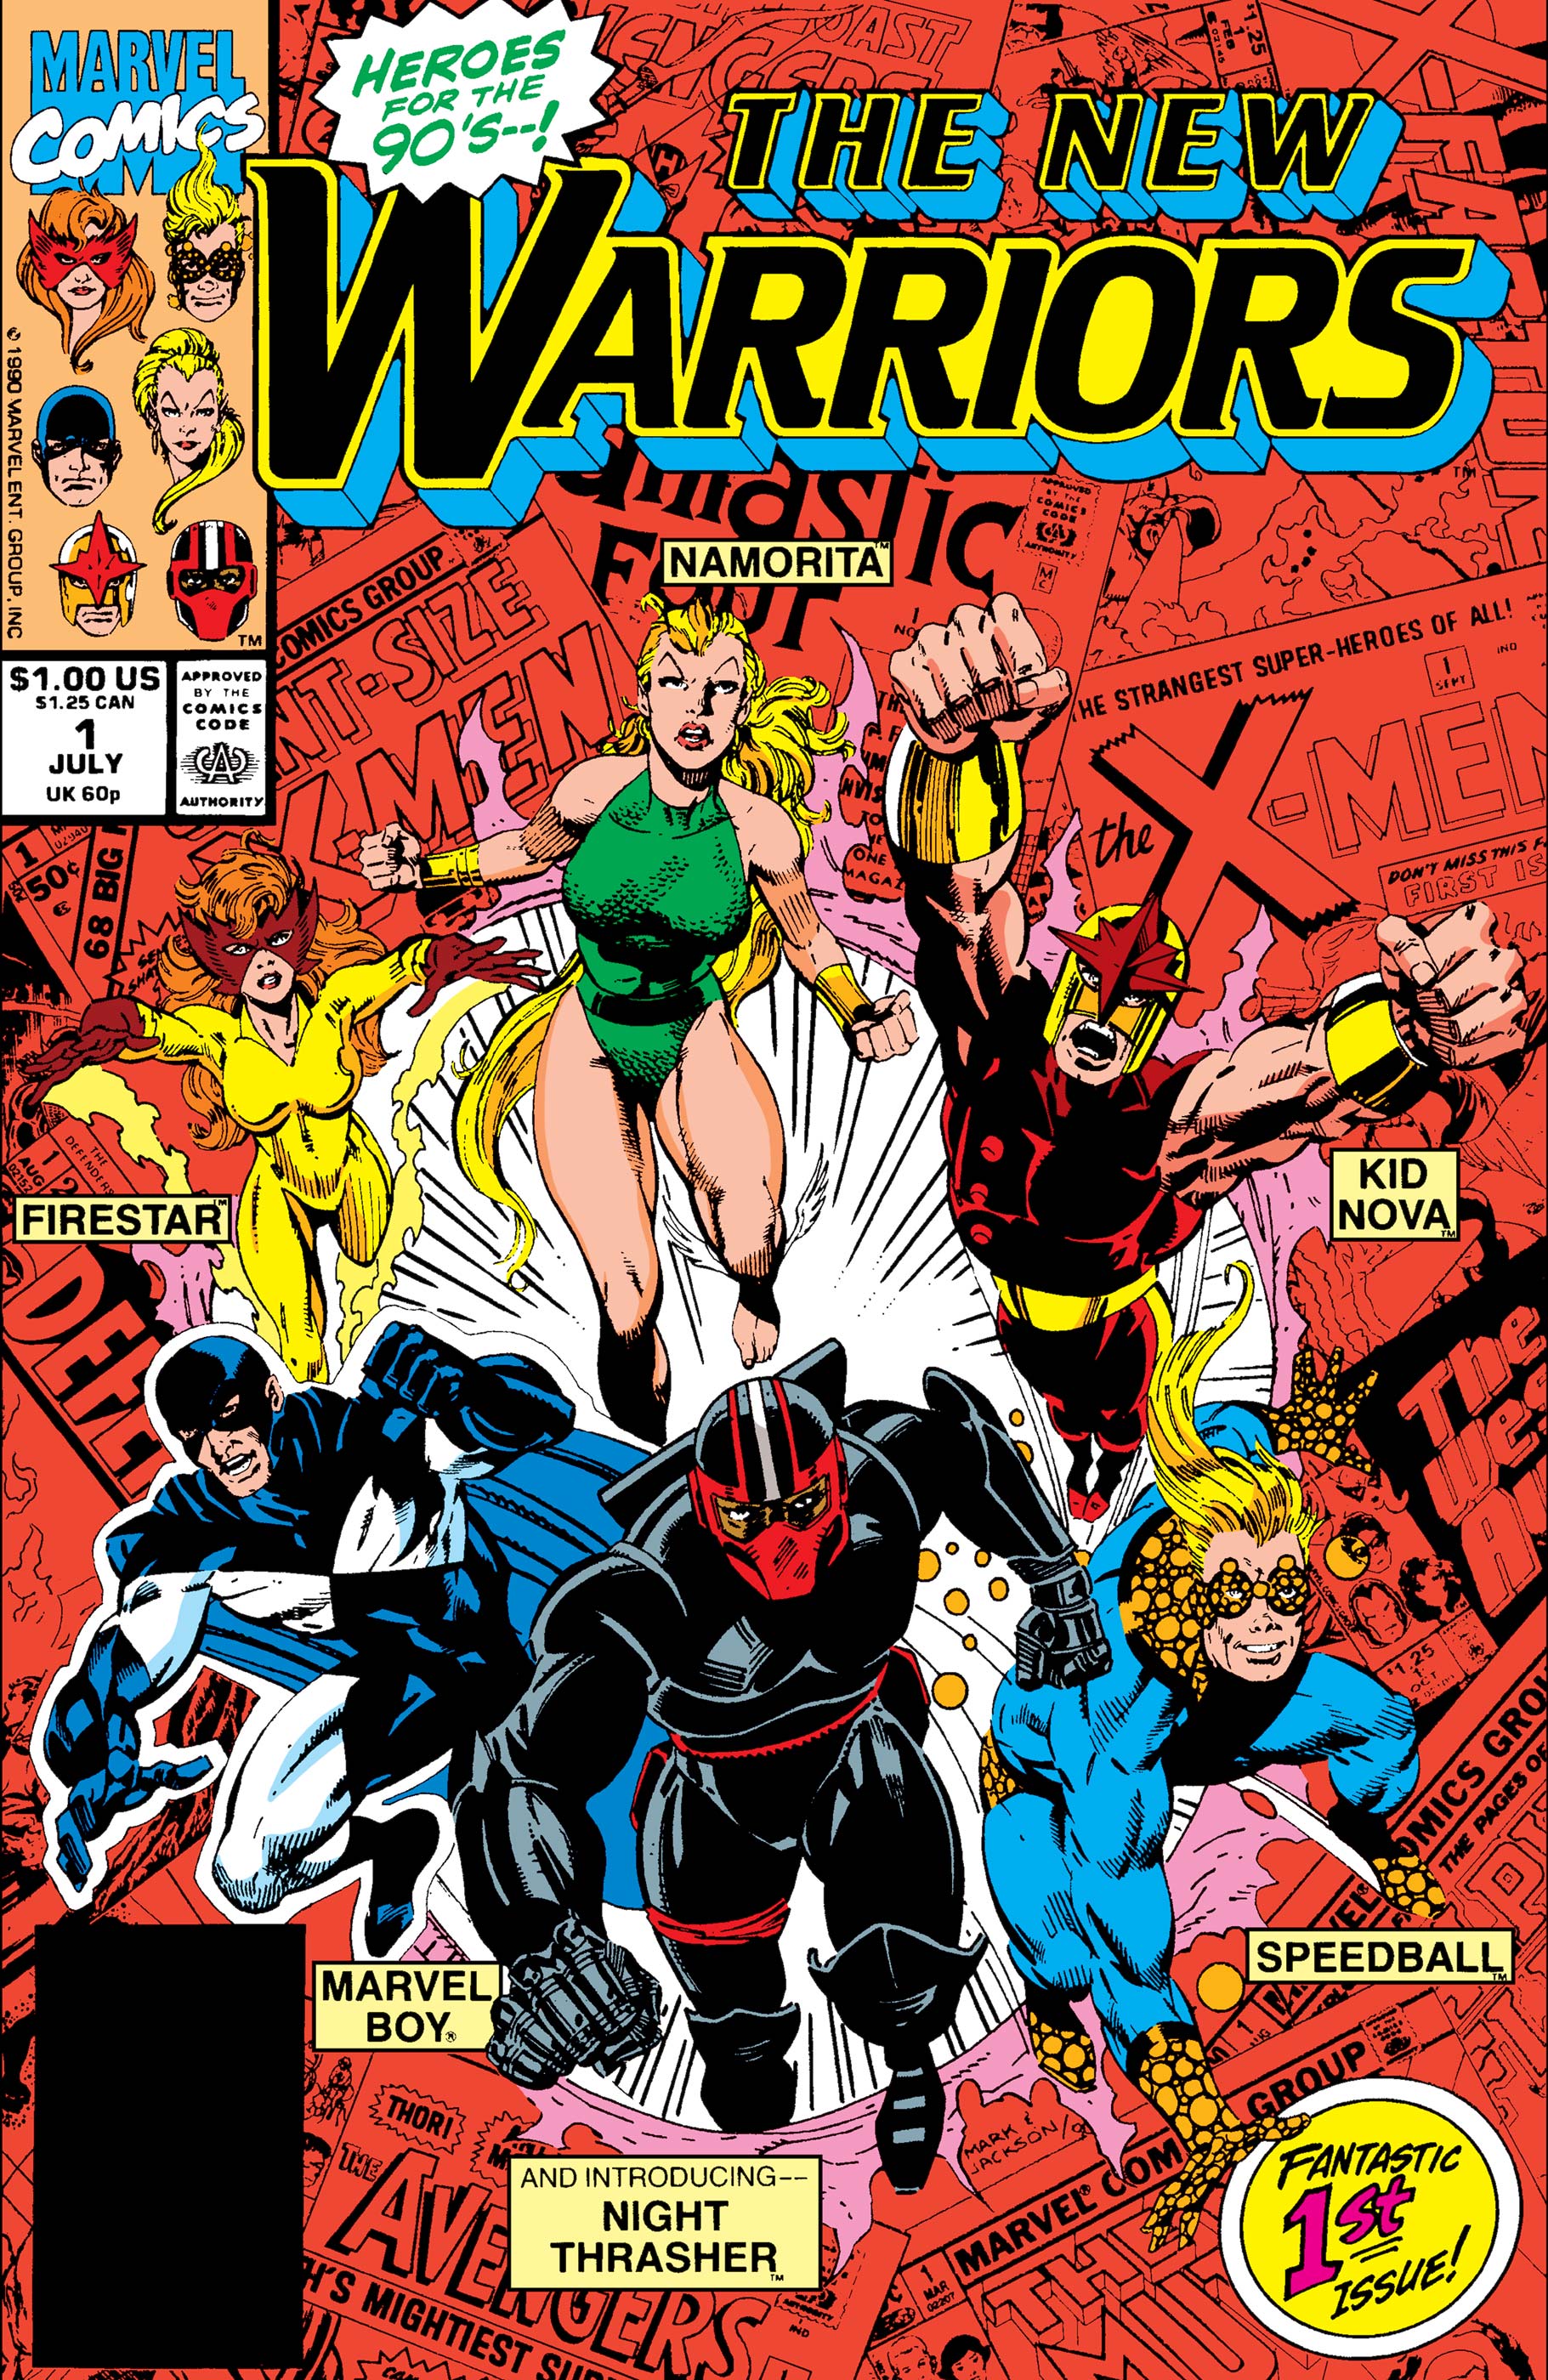 The Definitive New Warriors Collecting Guide and Reading Order